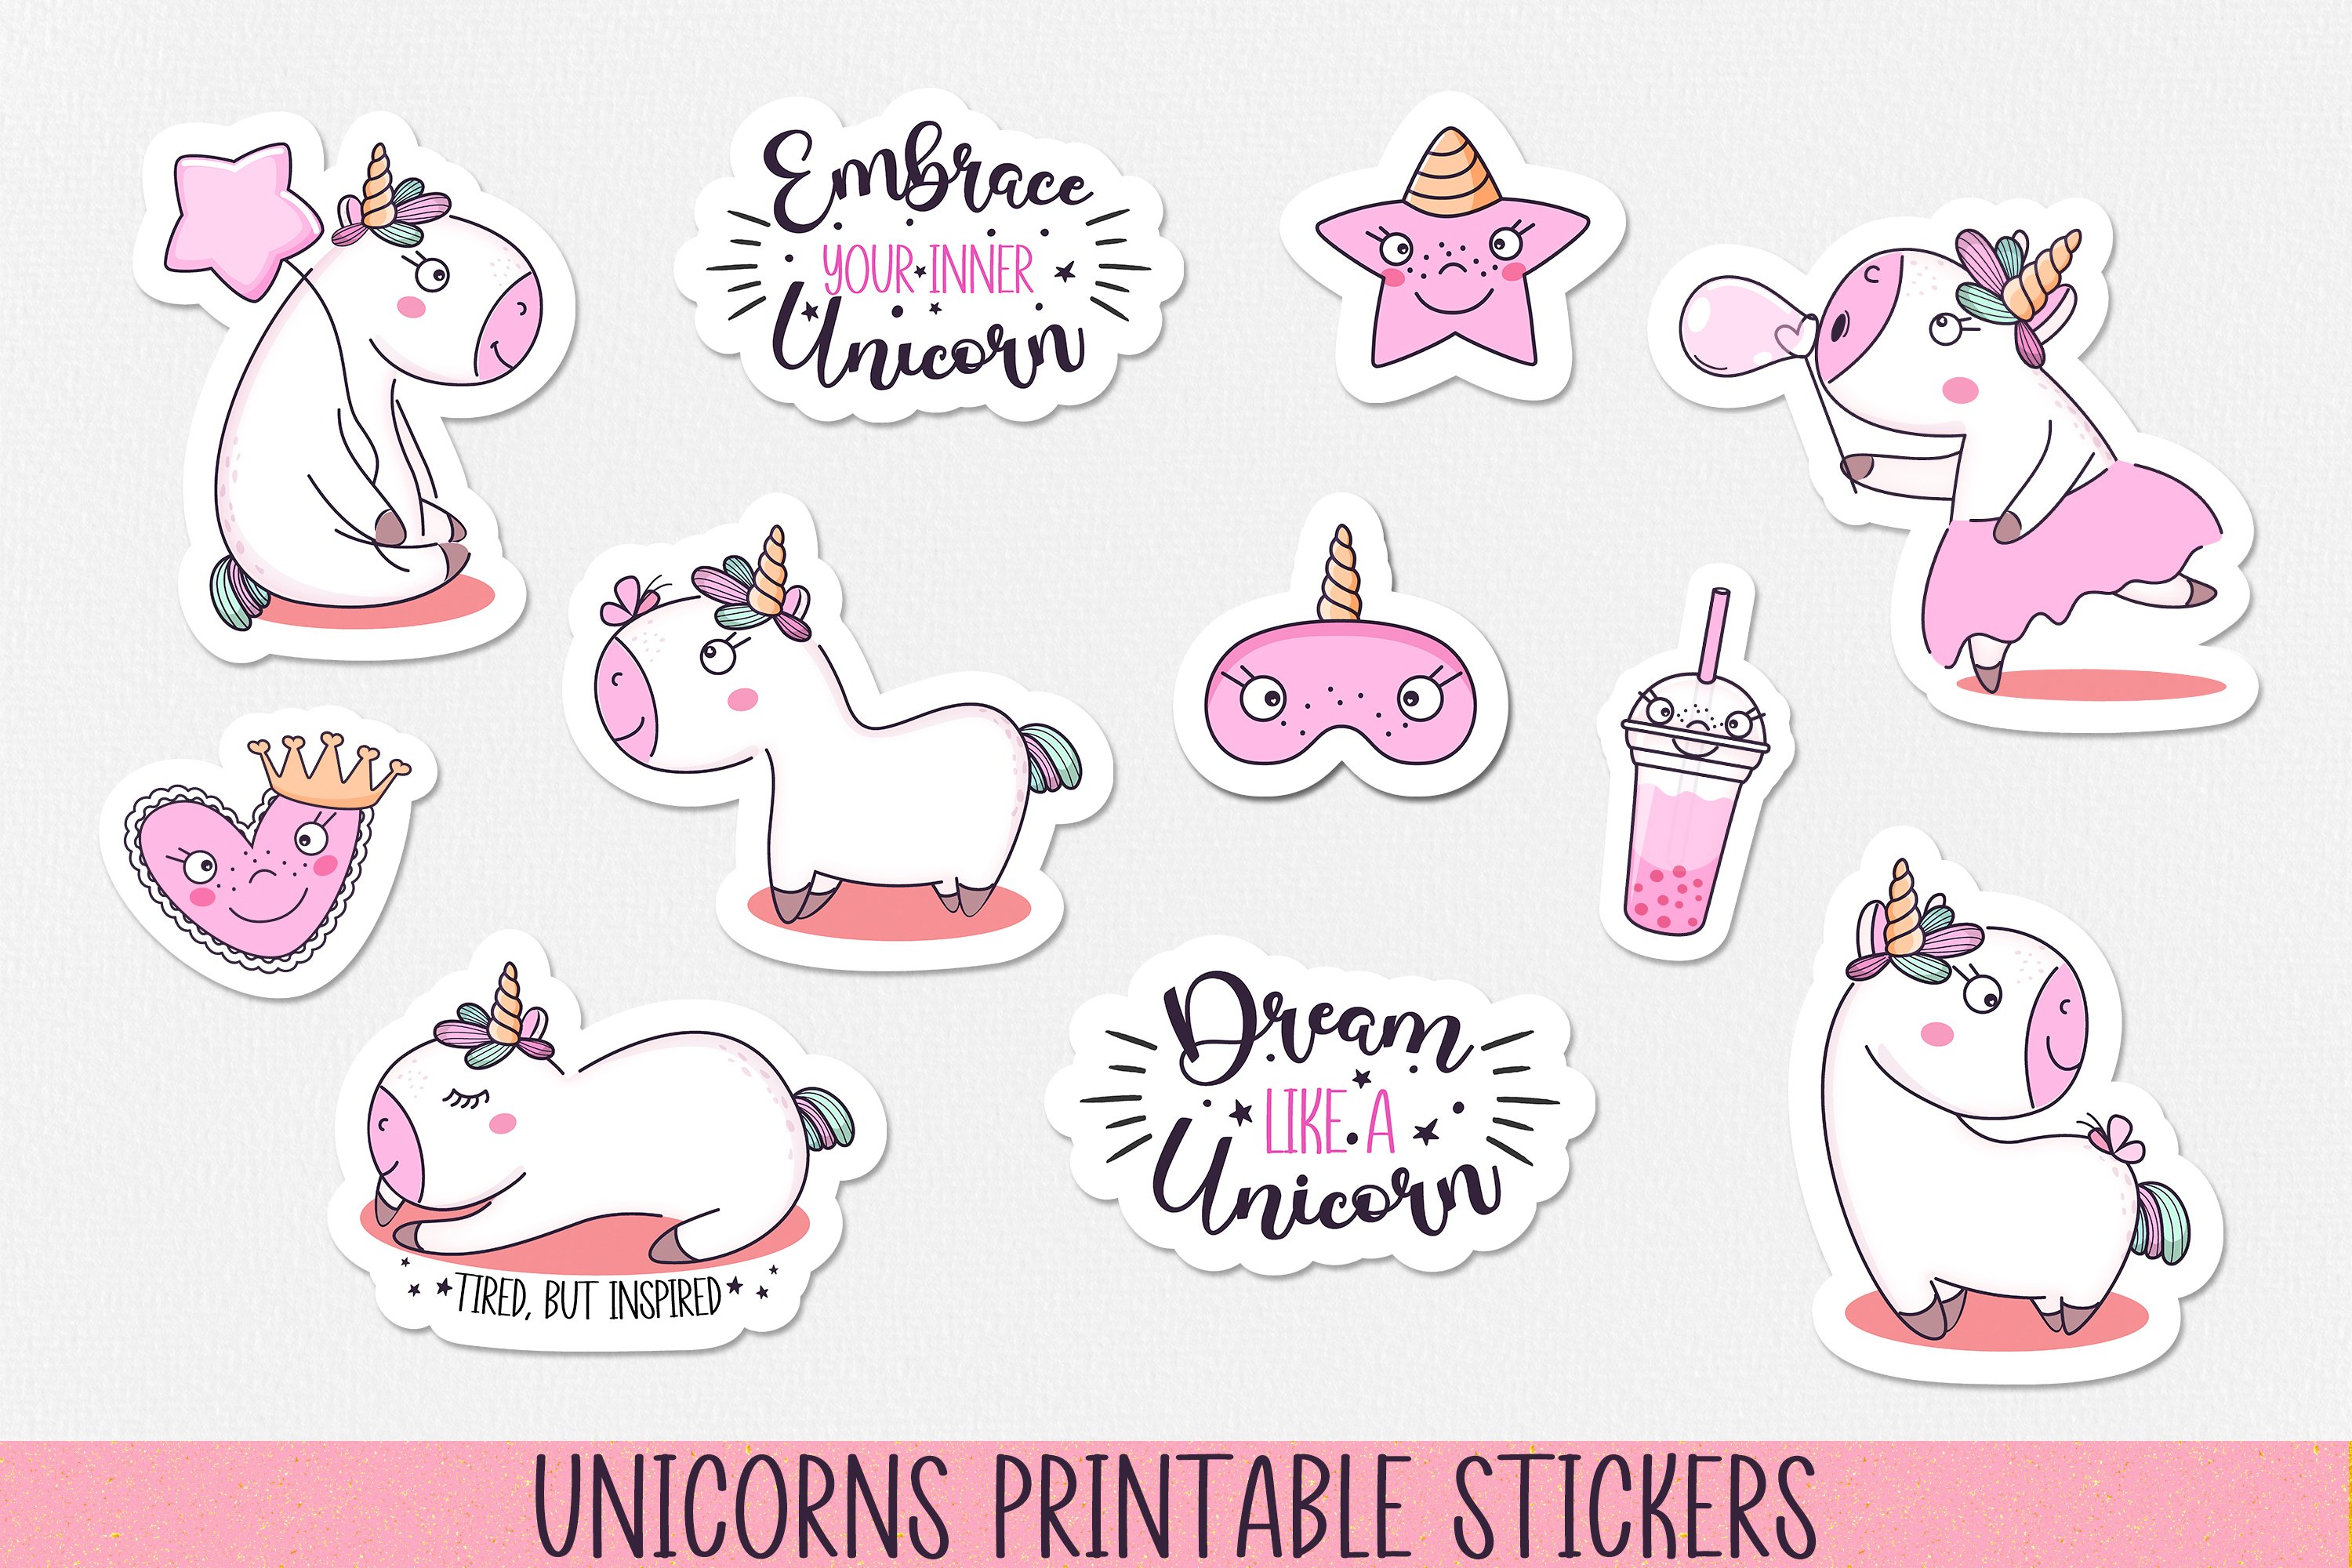 Image stickers with pink unicorns.